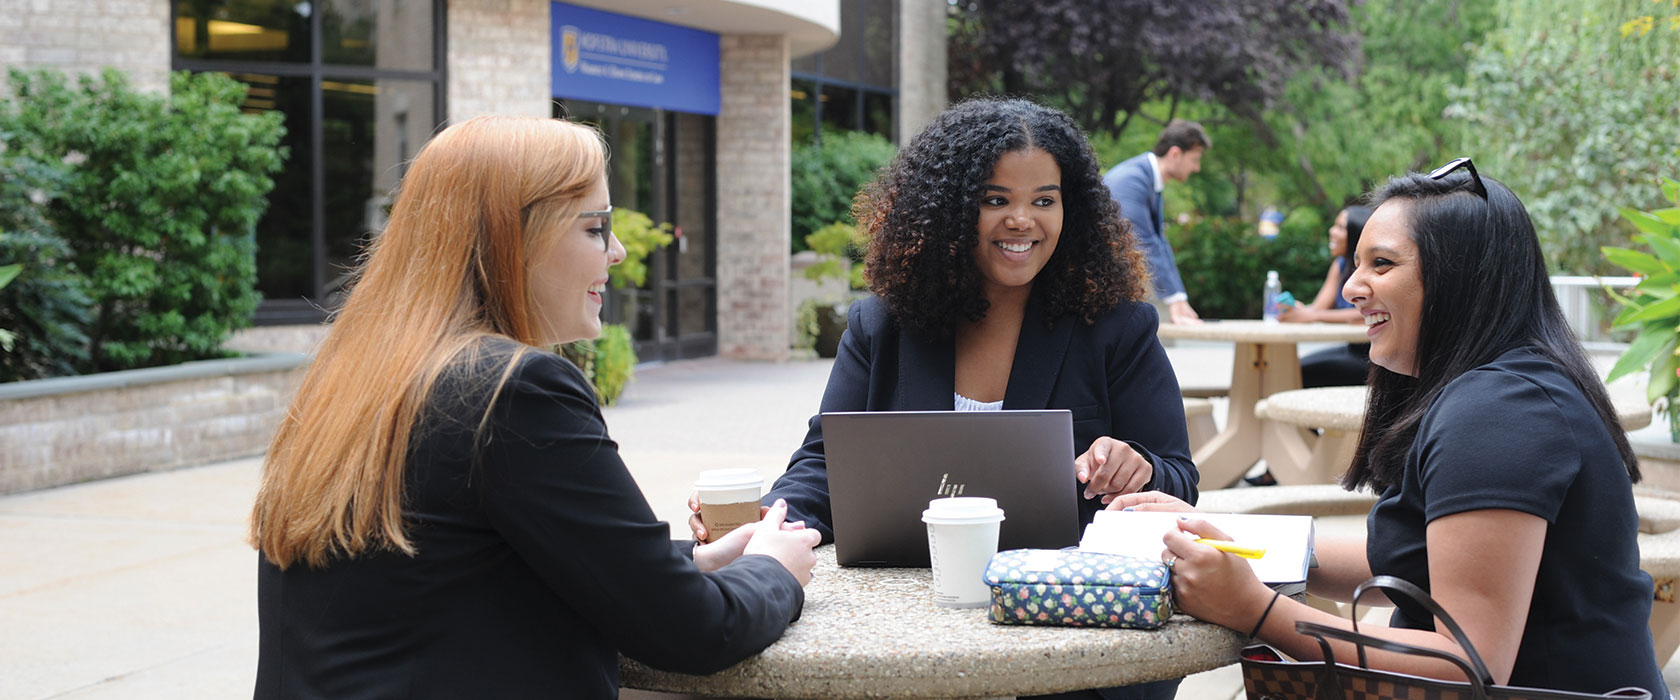 Three Students Meeting Together at a Table Outside on Campus